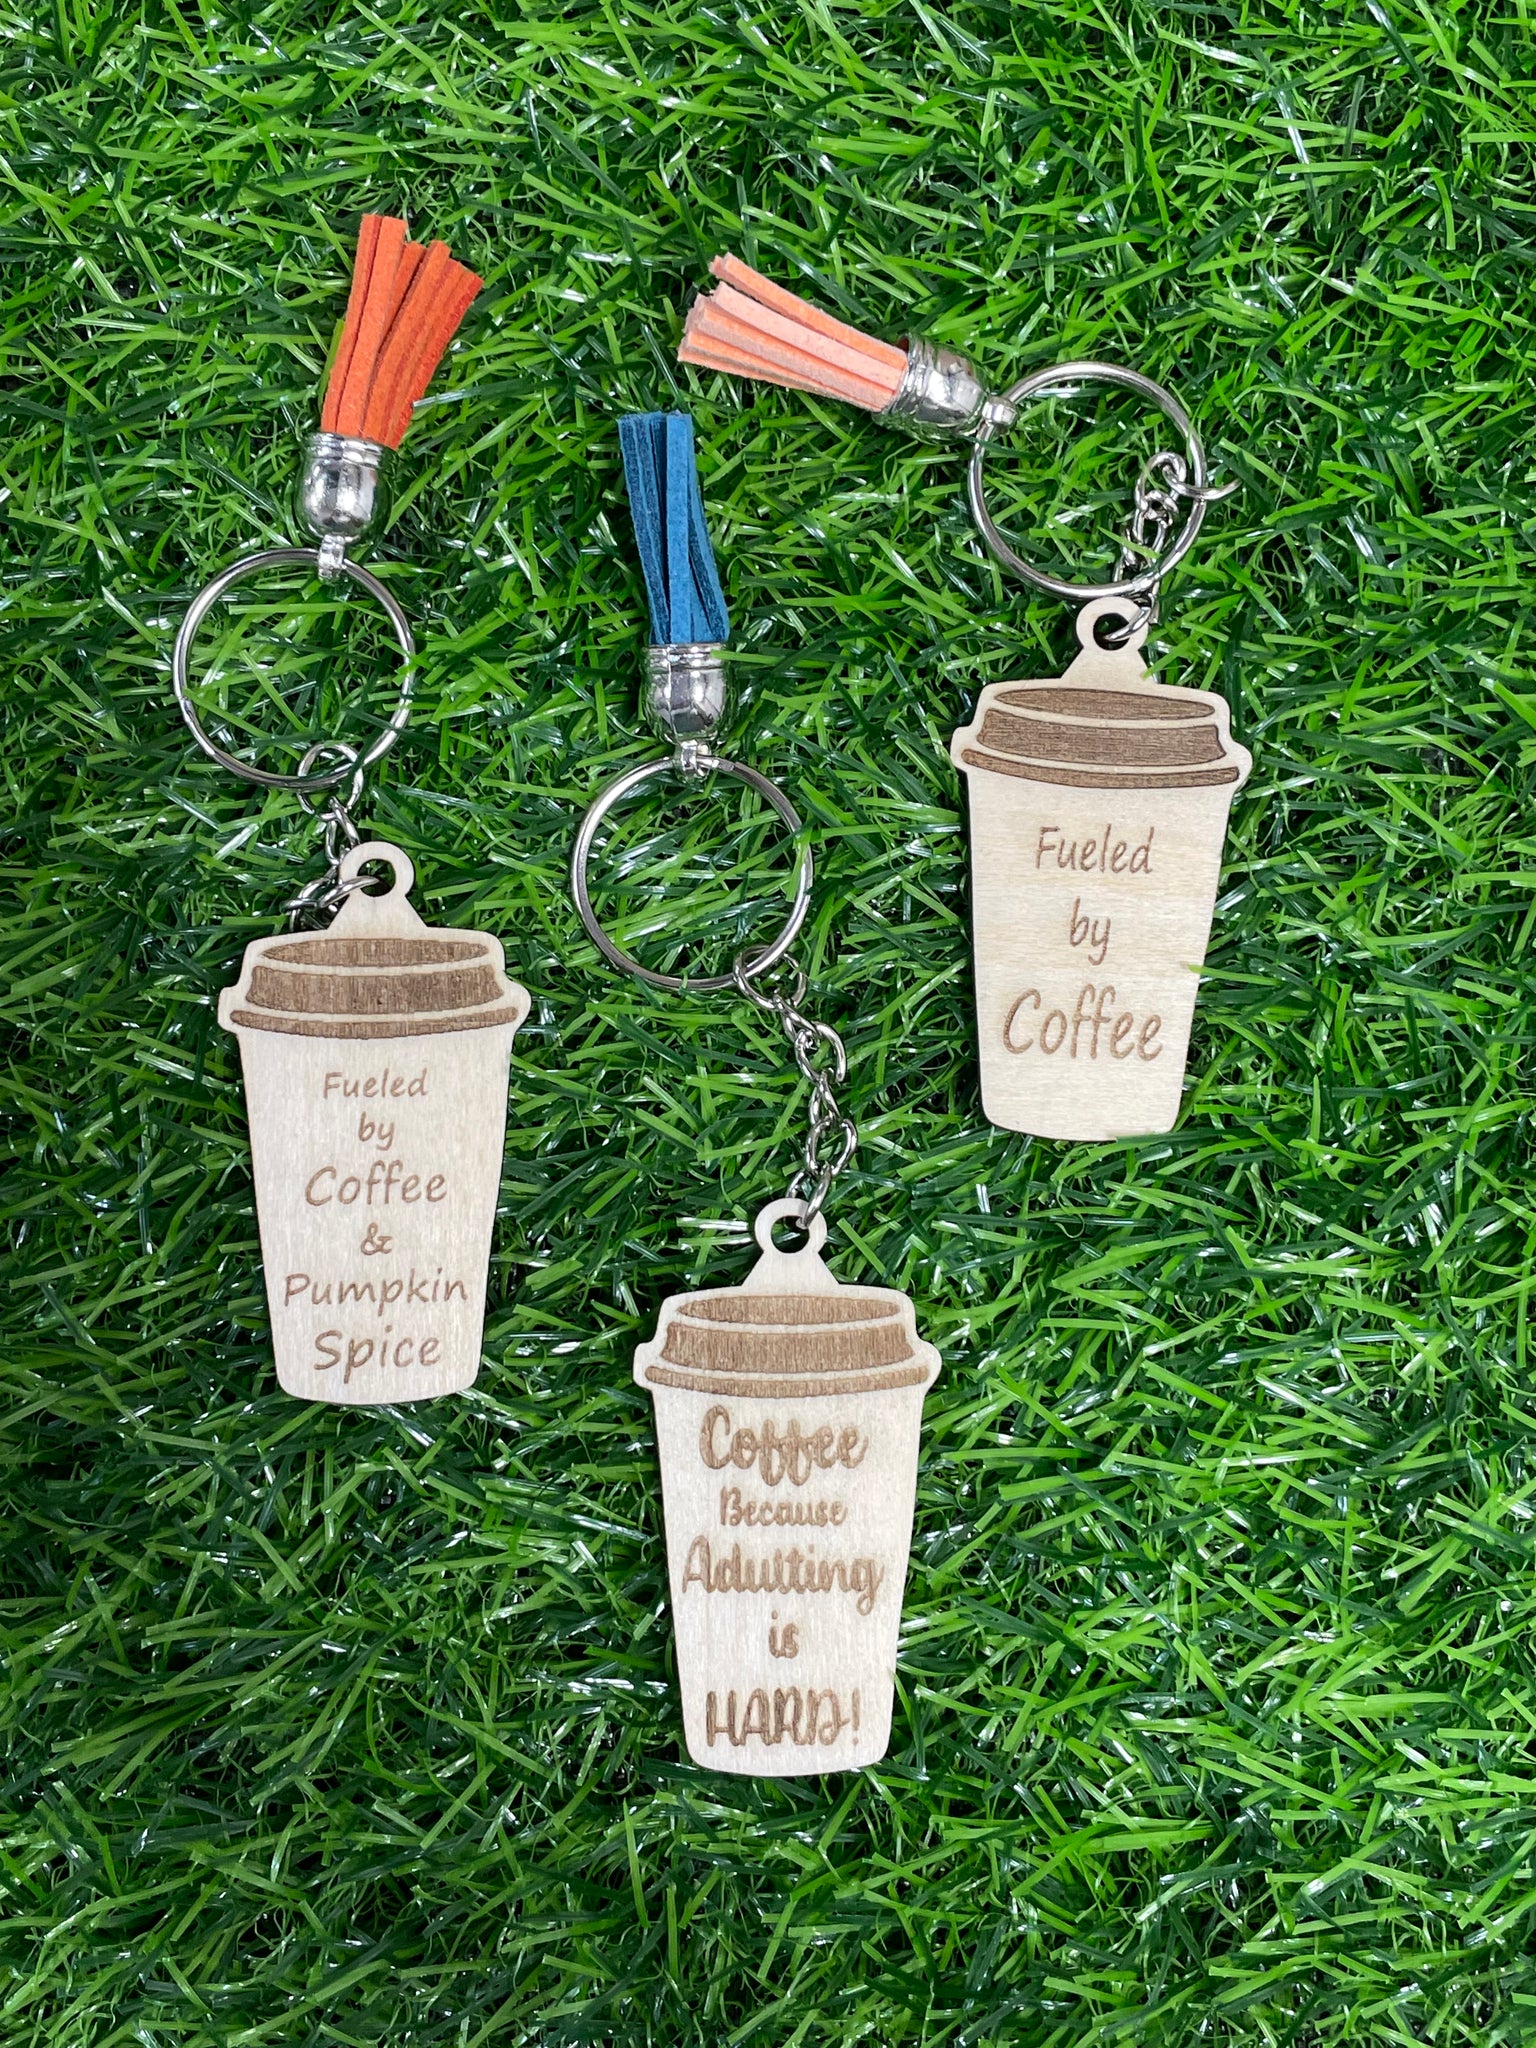 Coffee Cup Natural Wooden, Assorted Keychains: Fueled by Coffee & Pumpkin Spice, Coffee Because Adulting is Hard!, and Fueled by Coffee